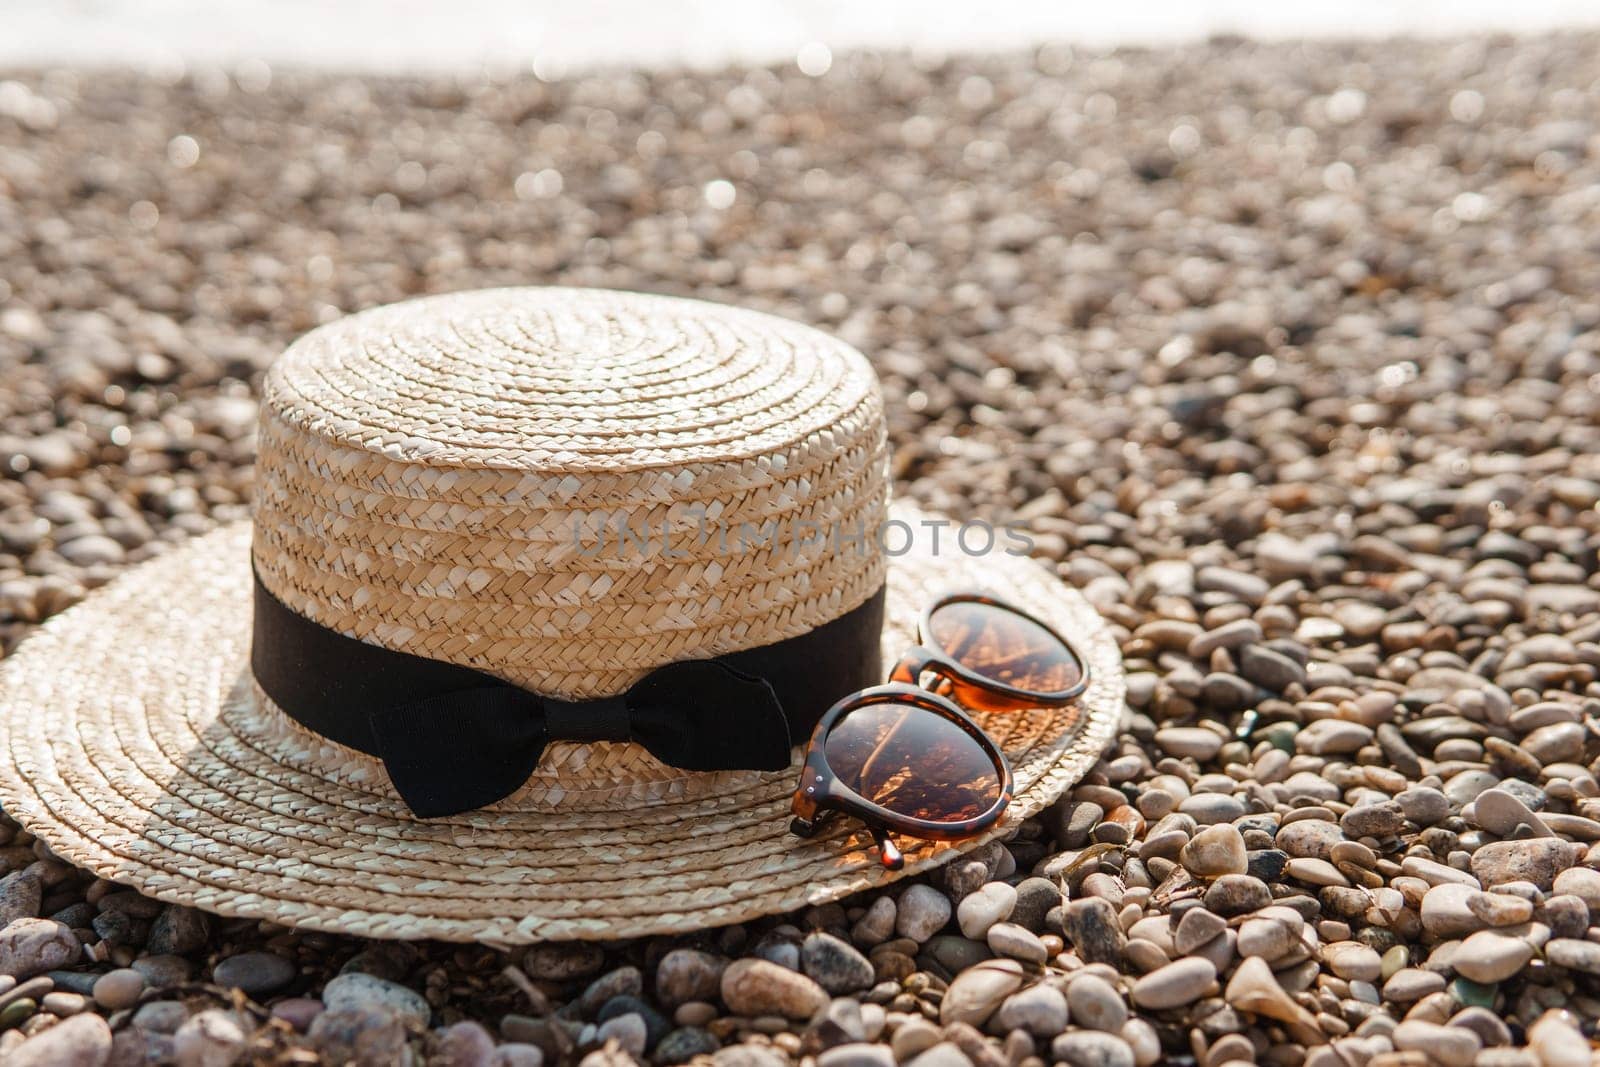 A straw hat and sunglasses on the beach. Pebbles on the seashore, close-up. The natural background.